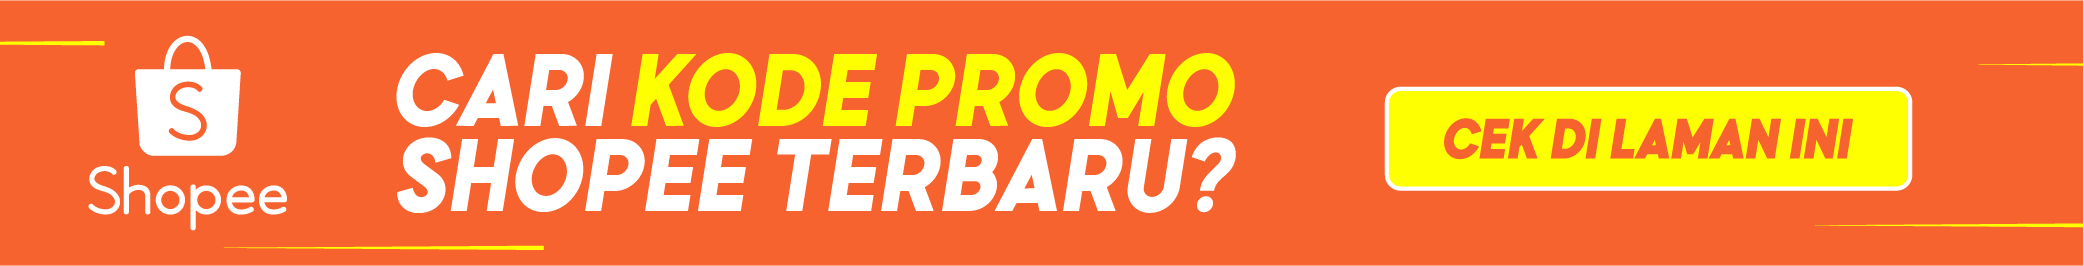 promo shopee-05.png